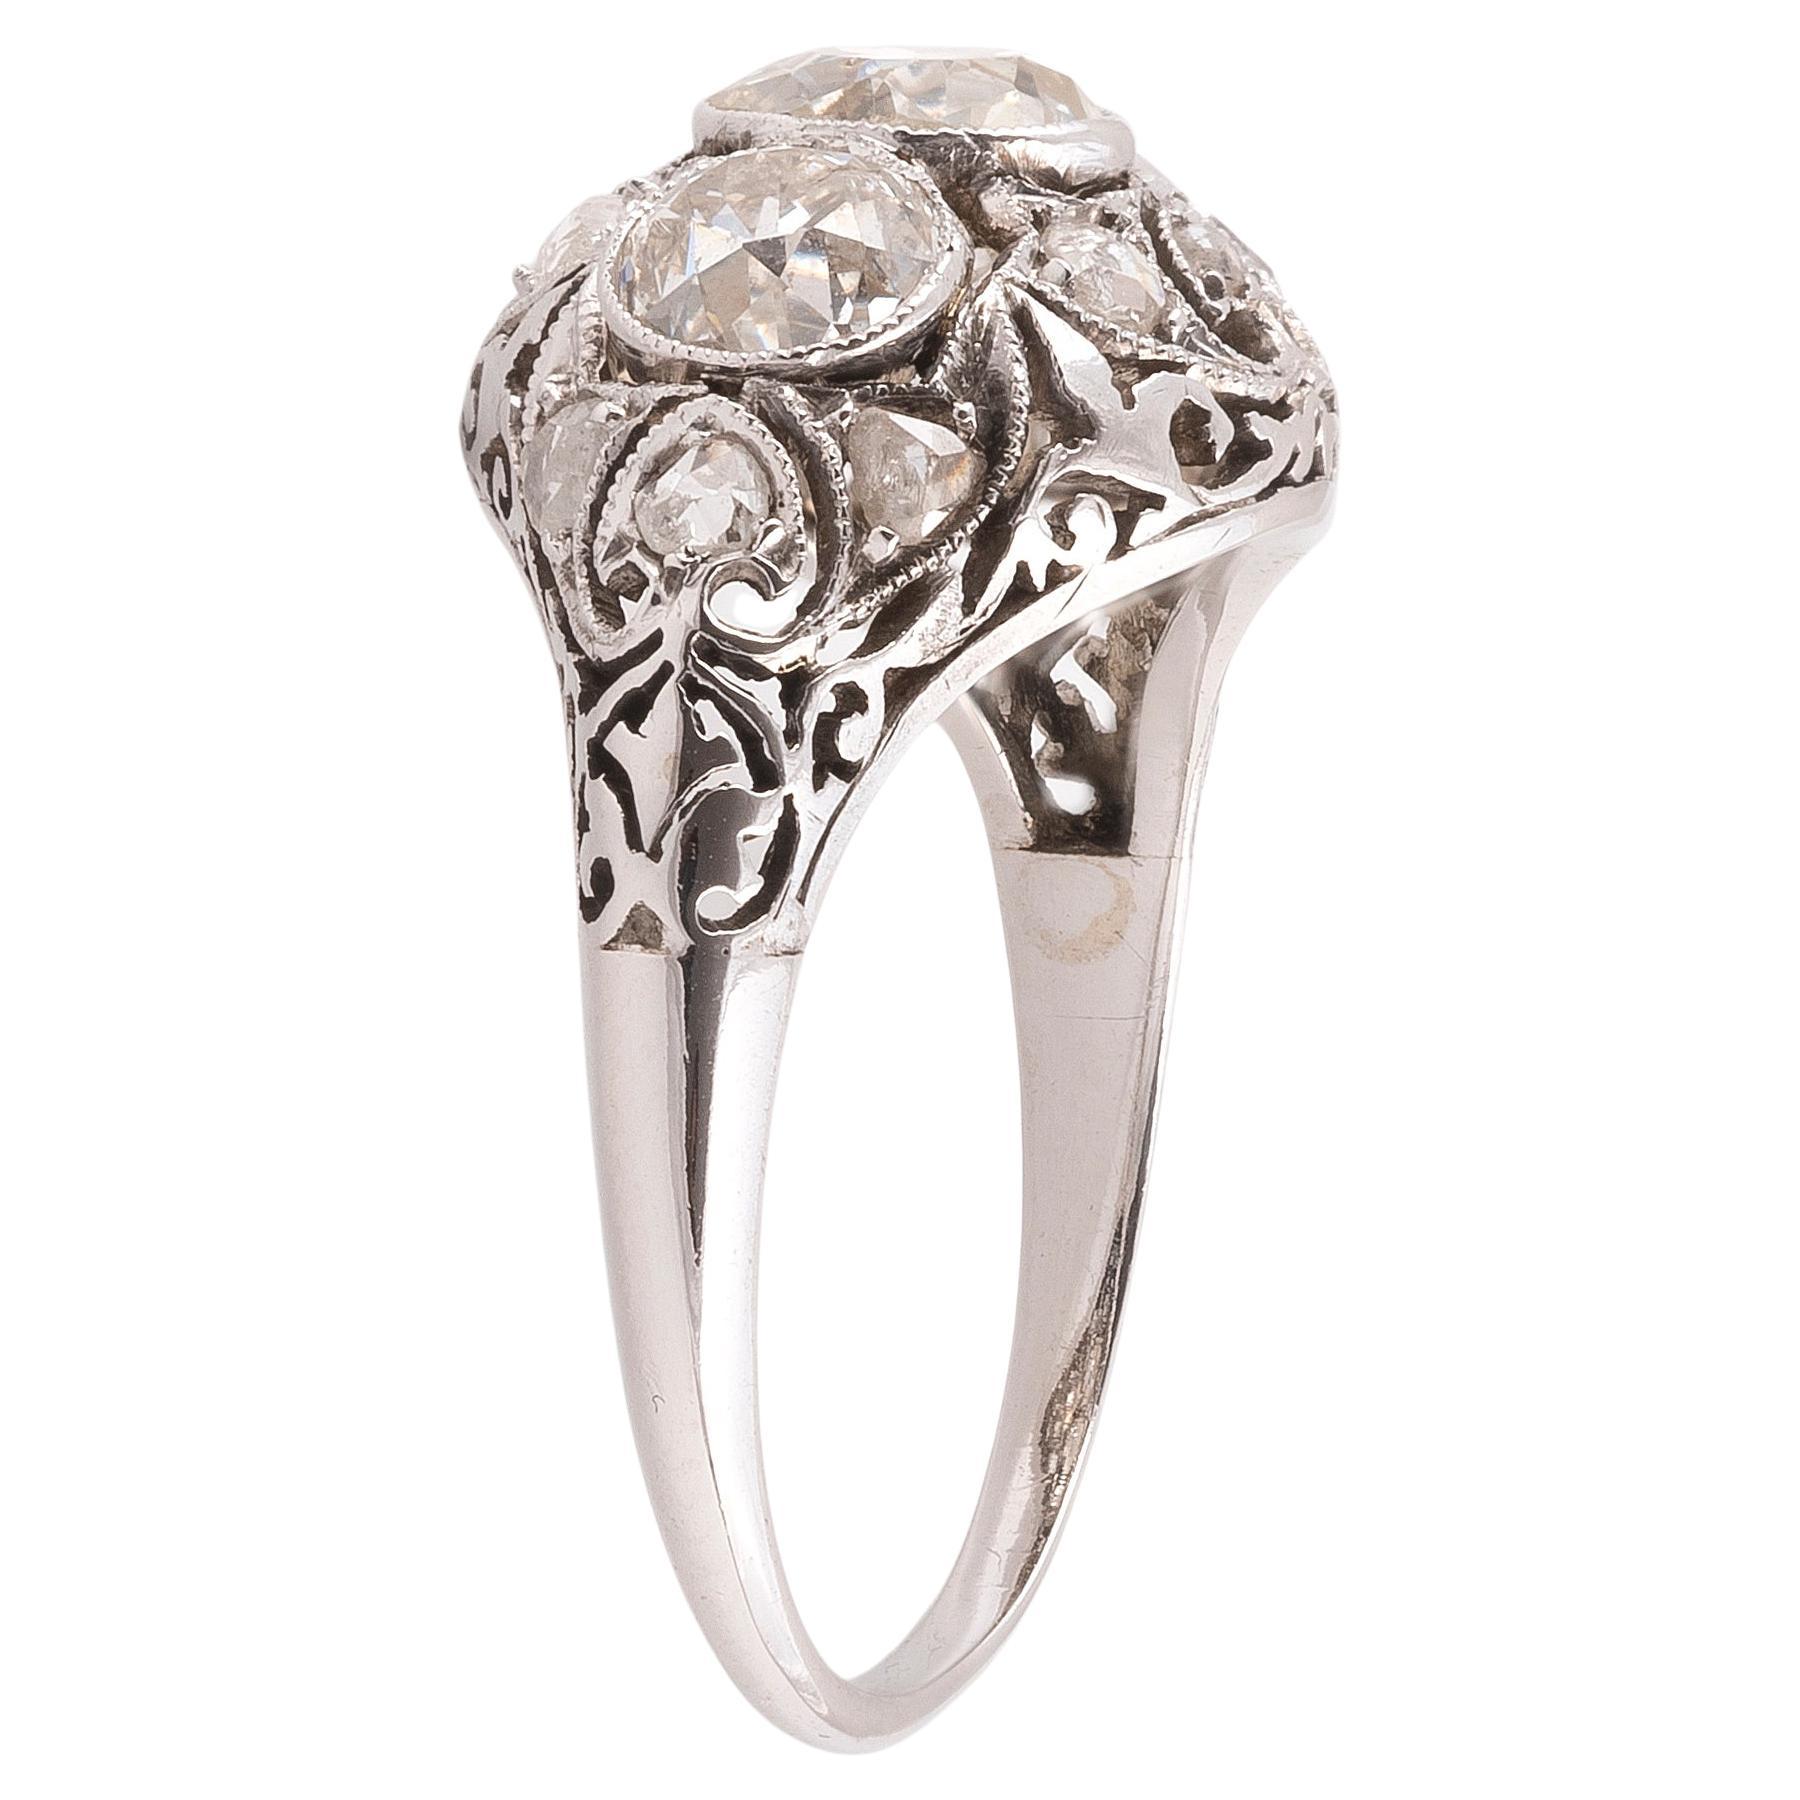 Retro 18kt White Gold And Old Cut Diamond Ring